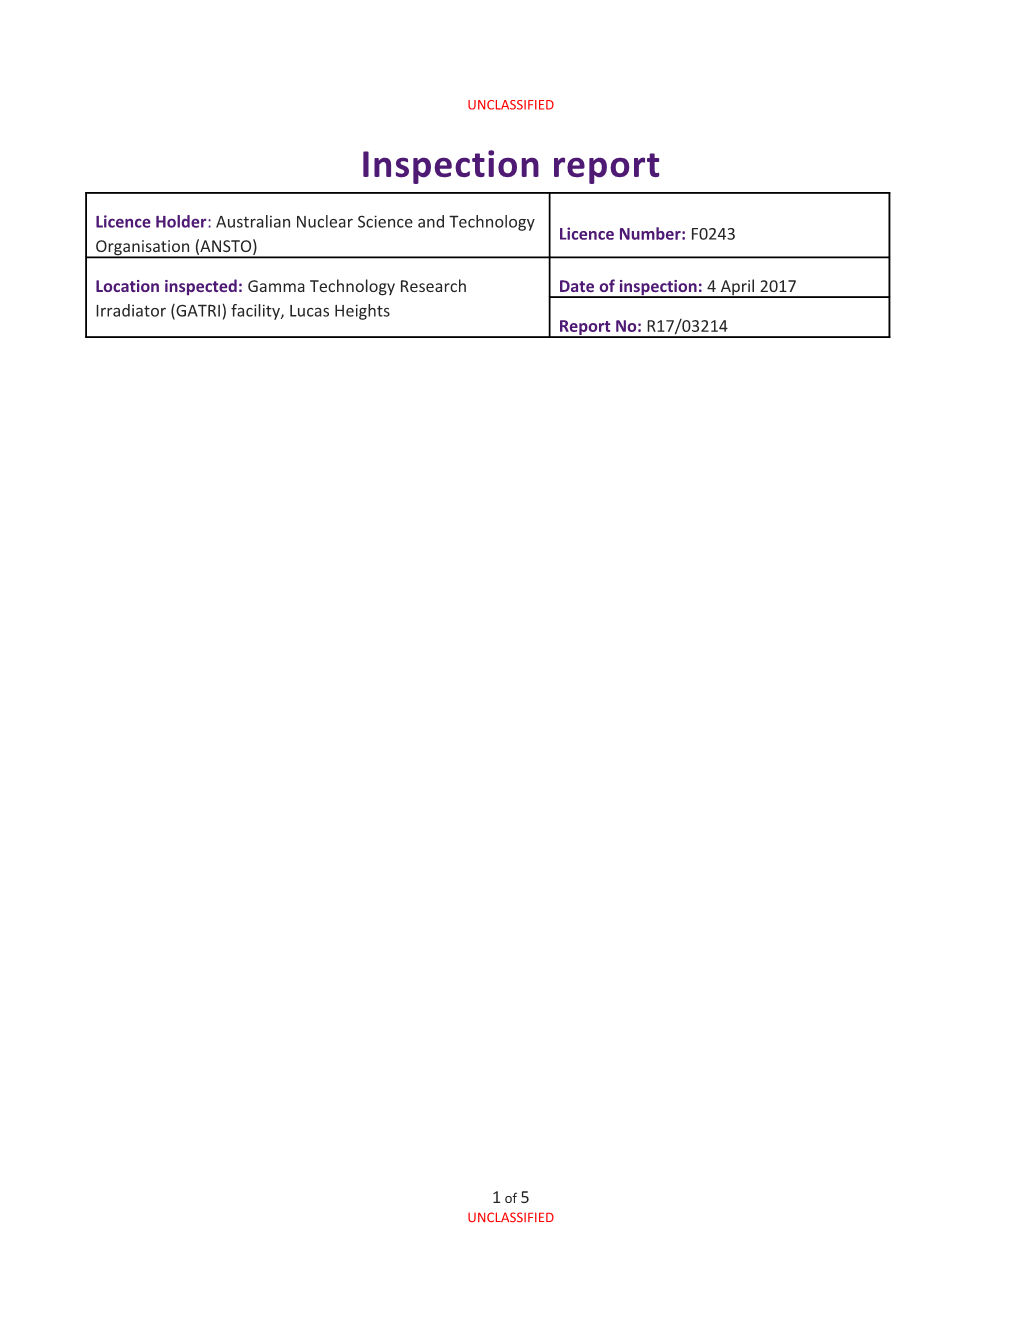 Inspection Report: Gamma Technology Research Irradiator (GATRI) Facility, Lucas Heights